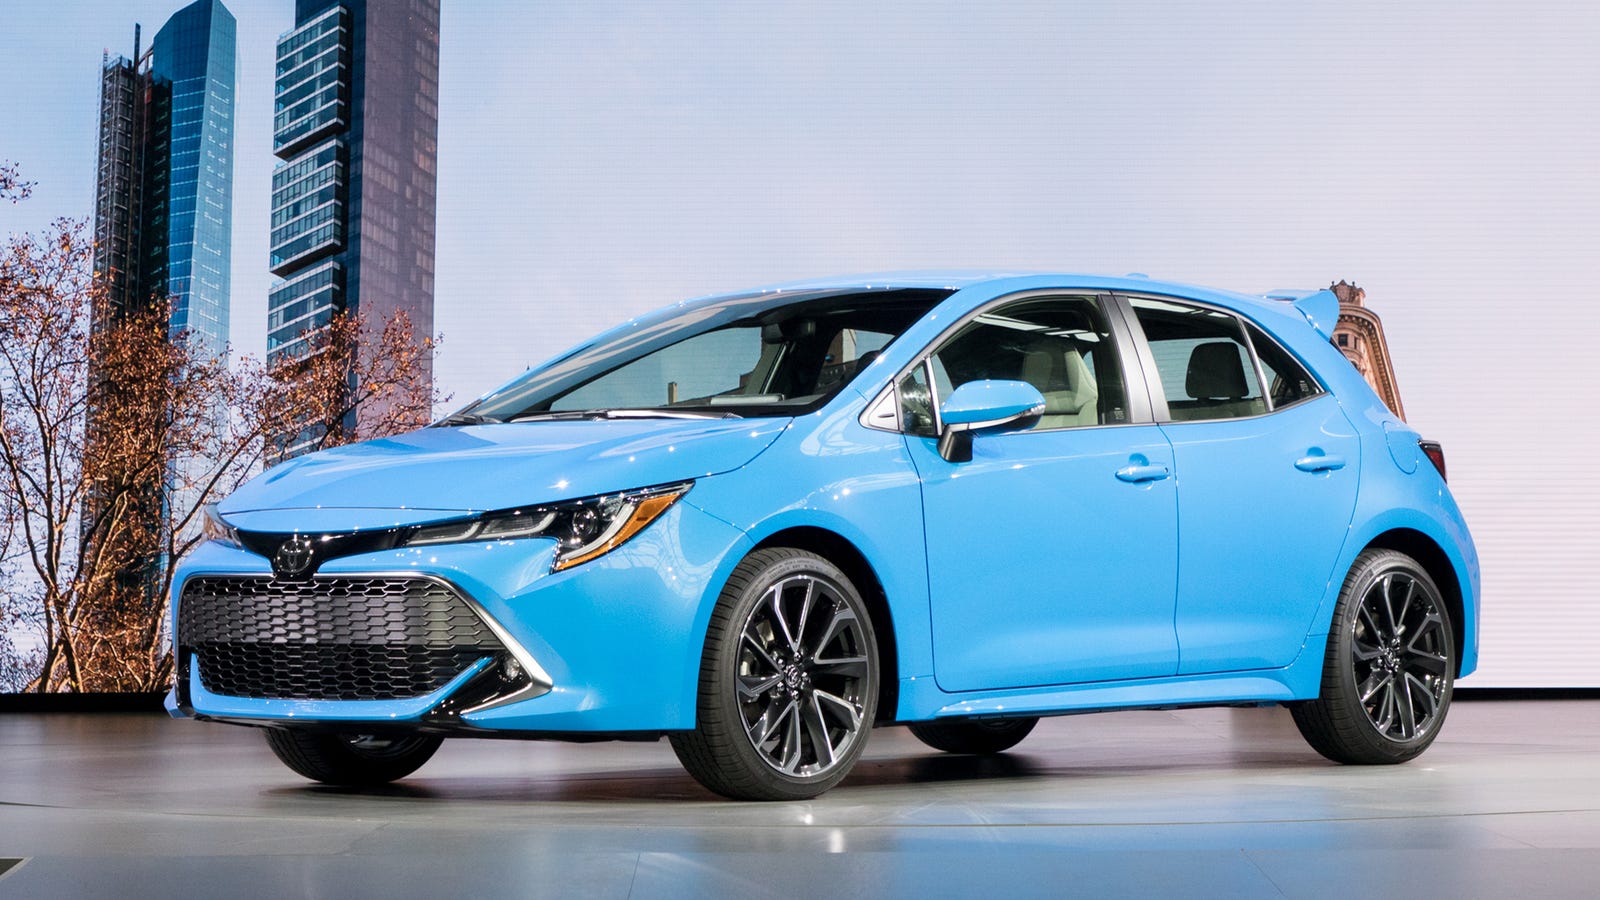 Why The 2019 Toyota Corolla Hatchback With A Manual Is Such A Big Deal